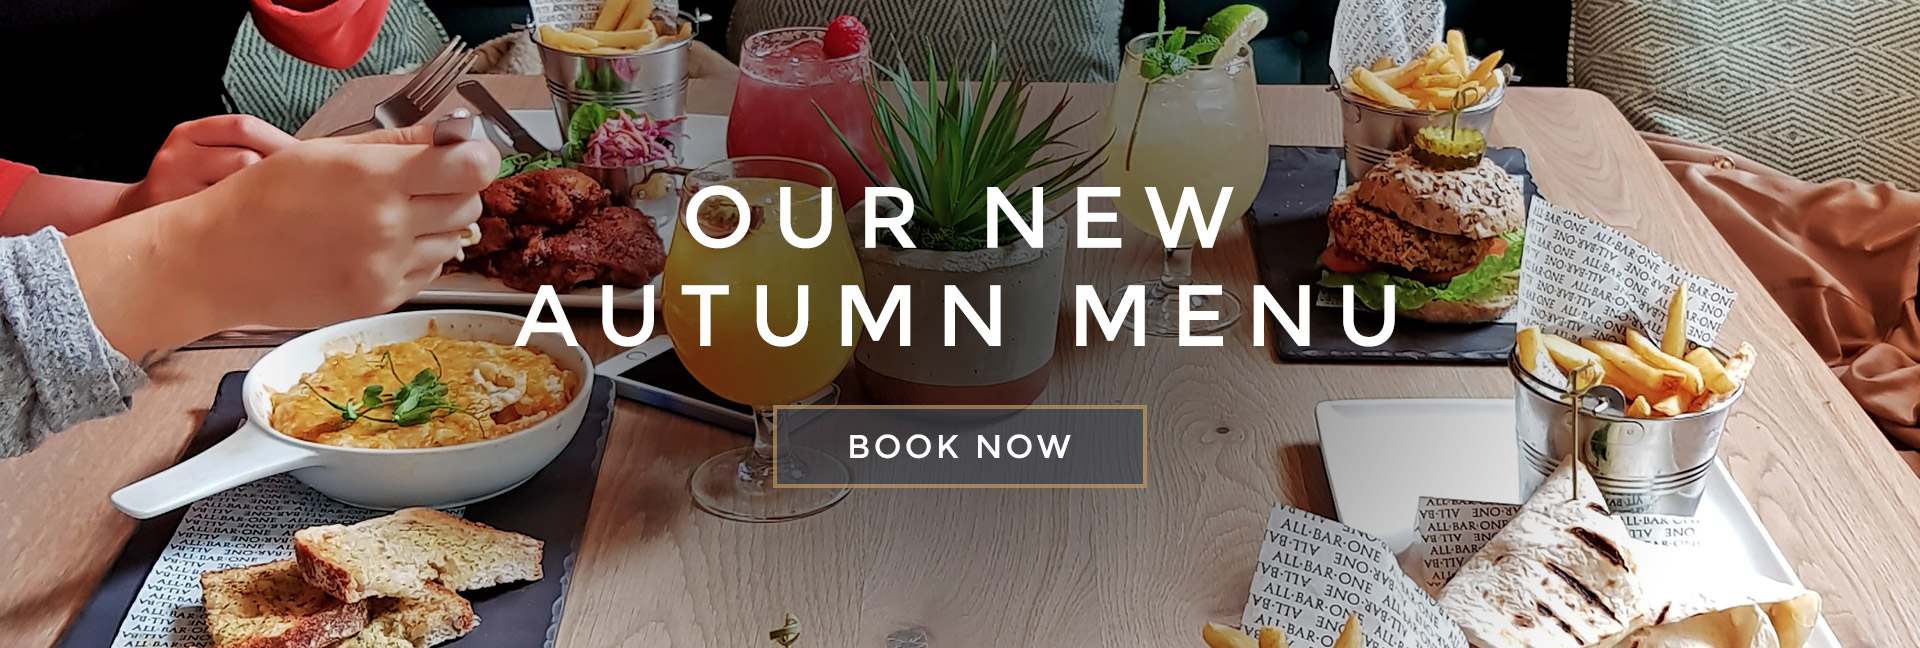 Our new Autumn menu at All Bar One Covent Garden - Book now